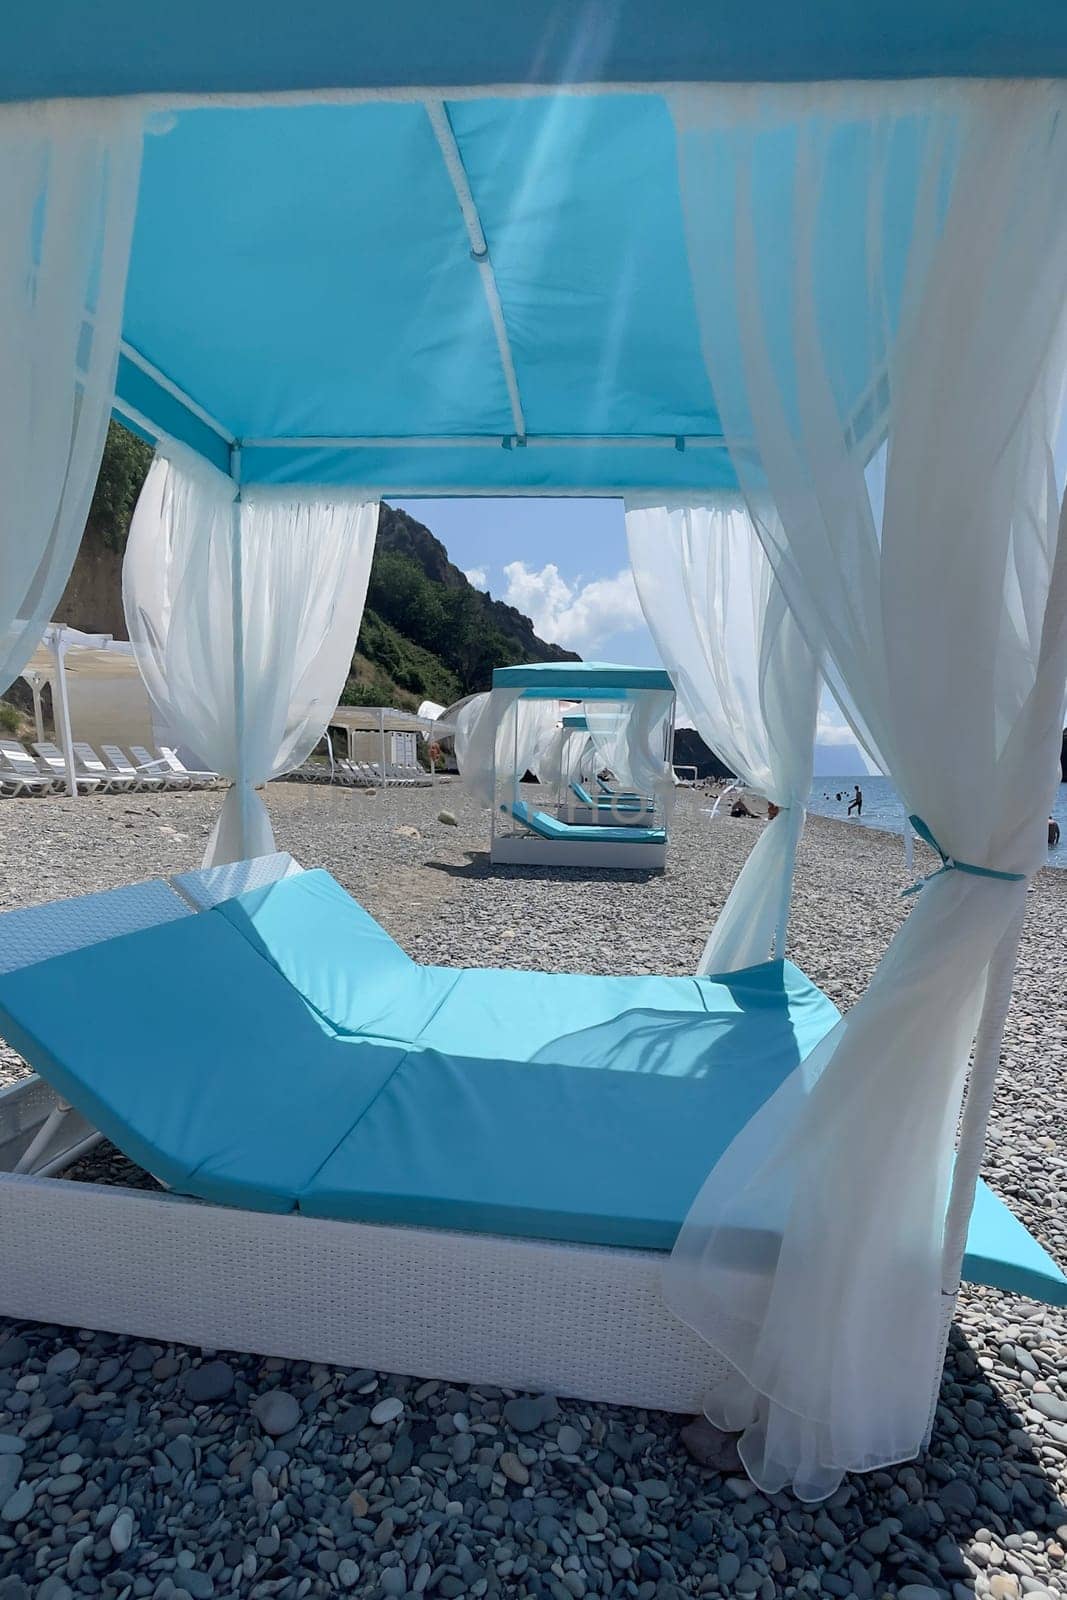 A blue and white beach umbrella with white curtains is set up on a beach. The umbrella is open and the white curtains are spread out, creating a relaxing and inviting atmosphere. The beach is empty